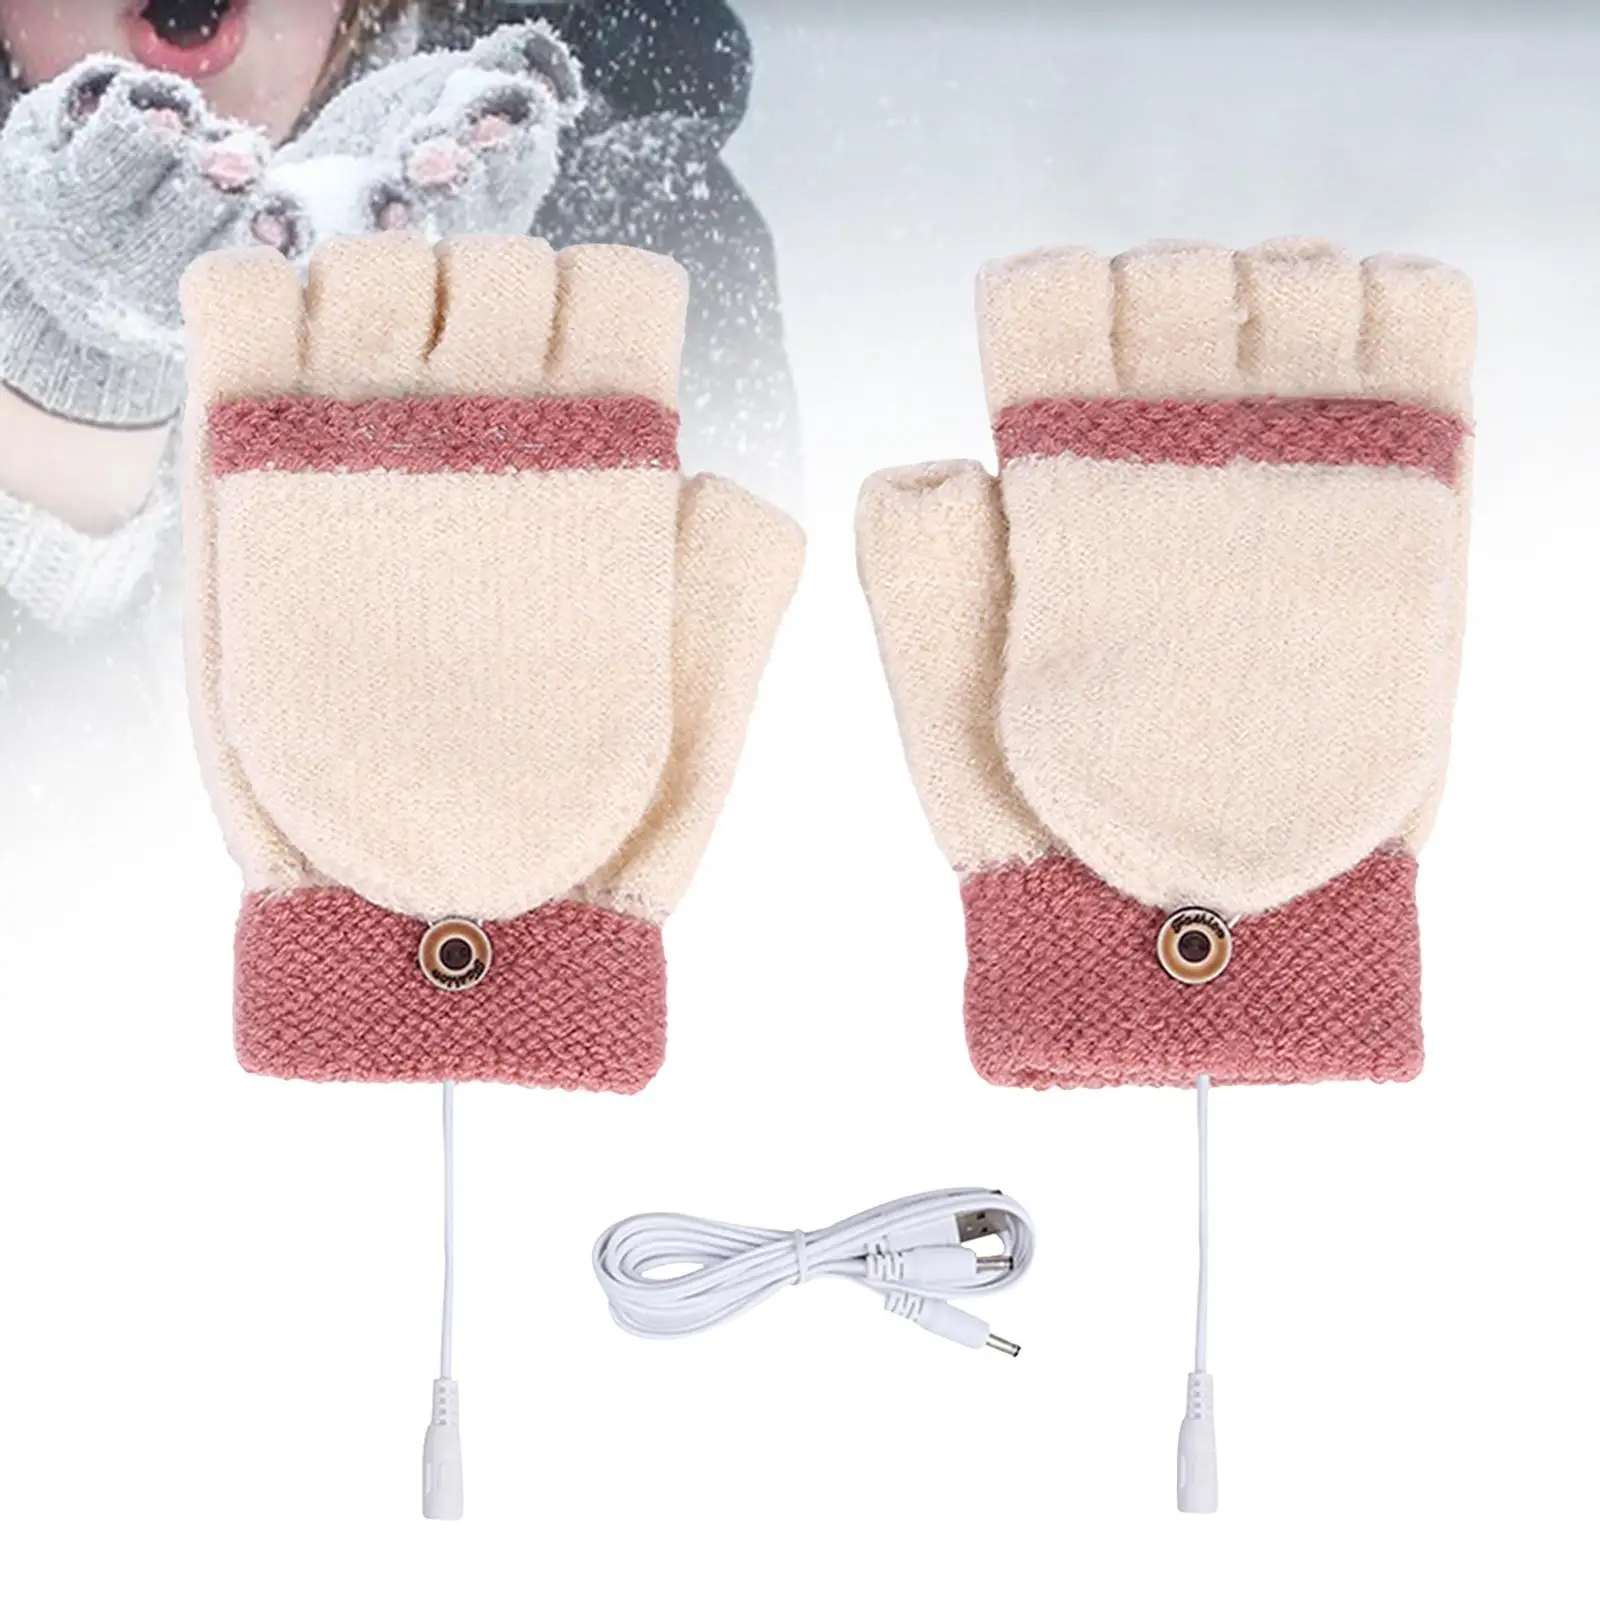 Electric Heated Gloves for Women Heating Mittens Fingerless Gloves Heating Gloves Hands Warmer for Sports Hiking Indoor